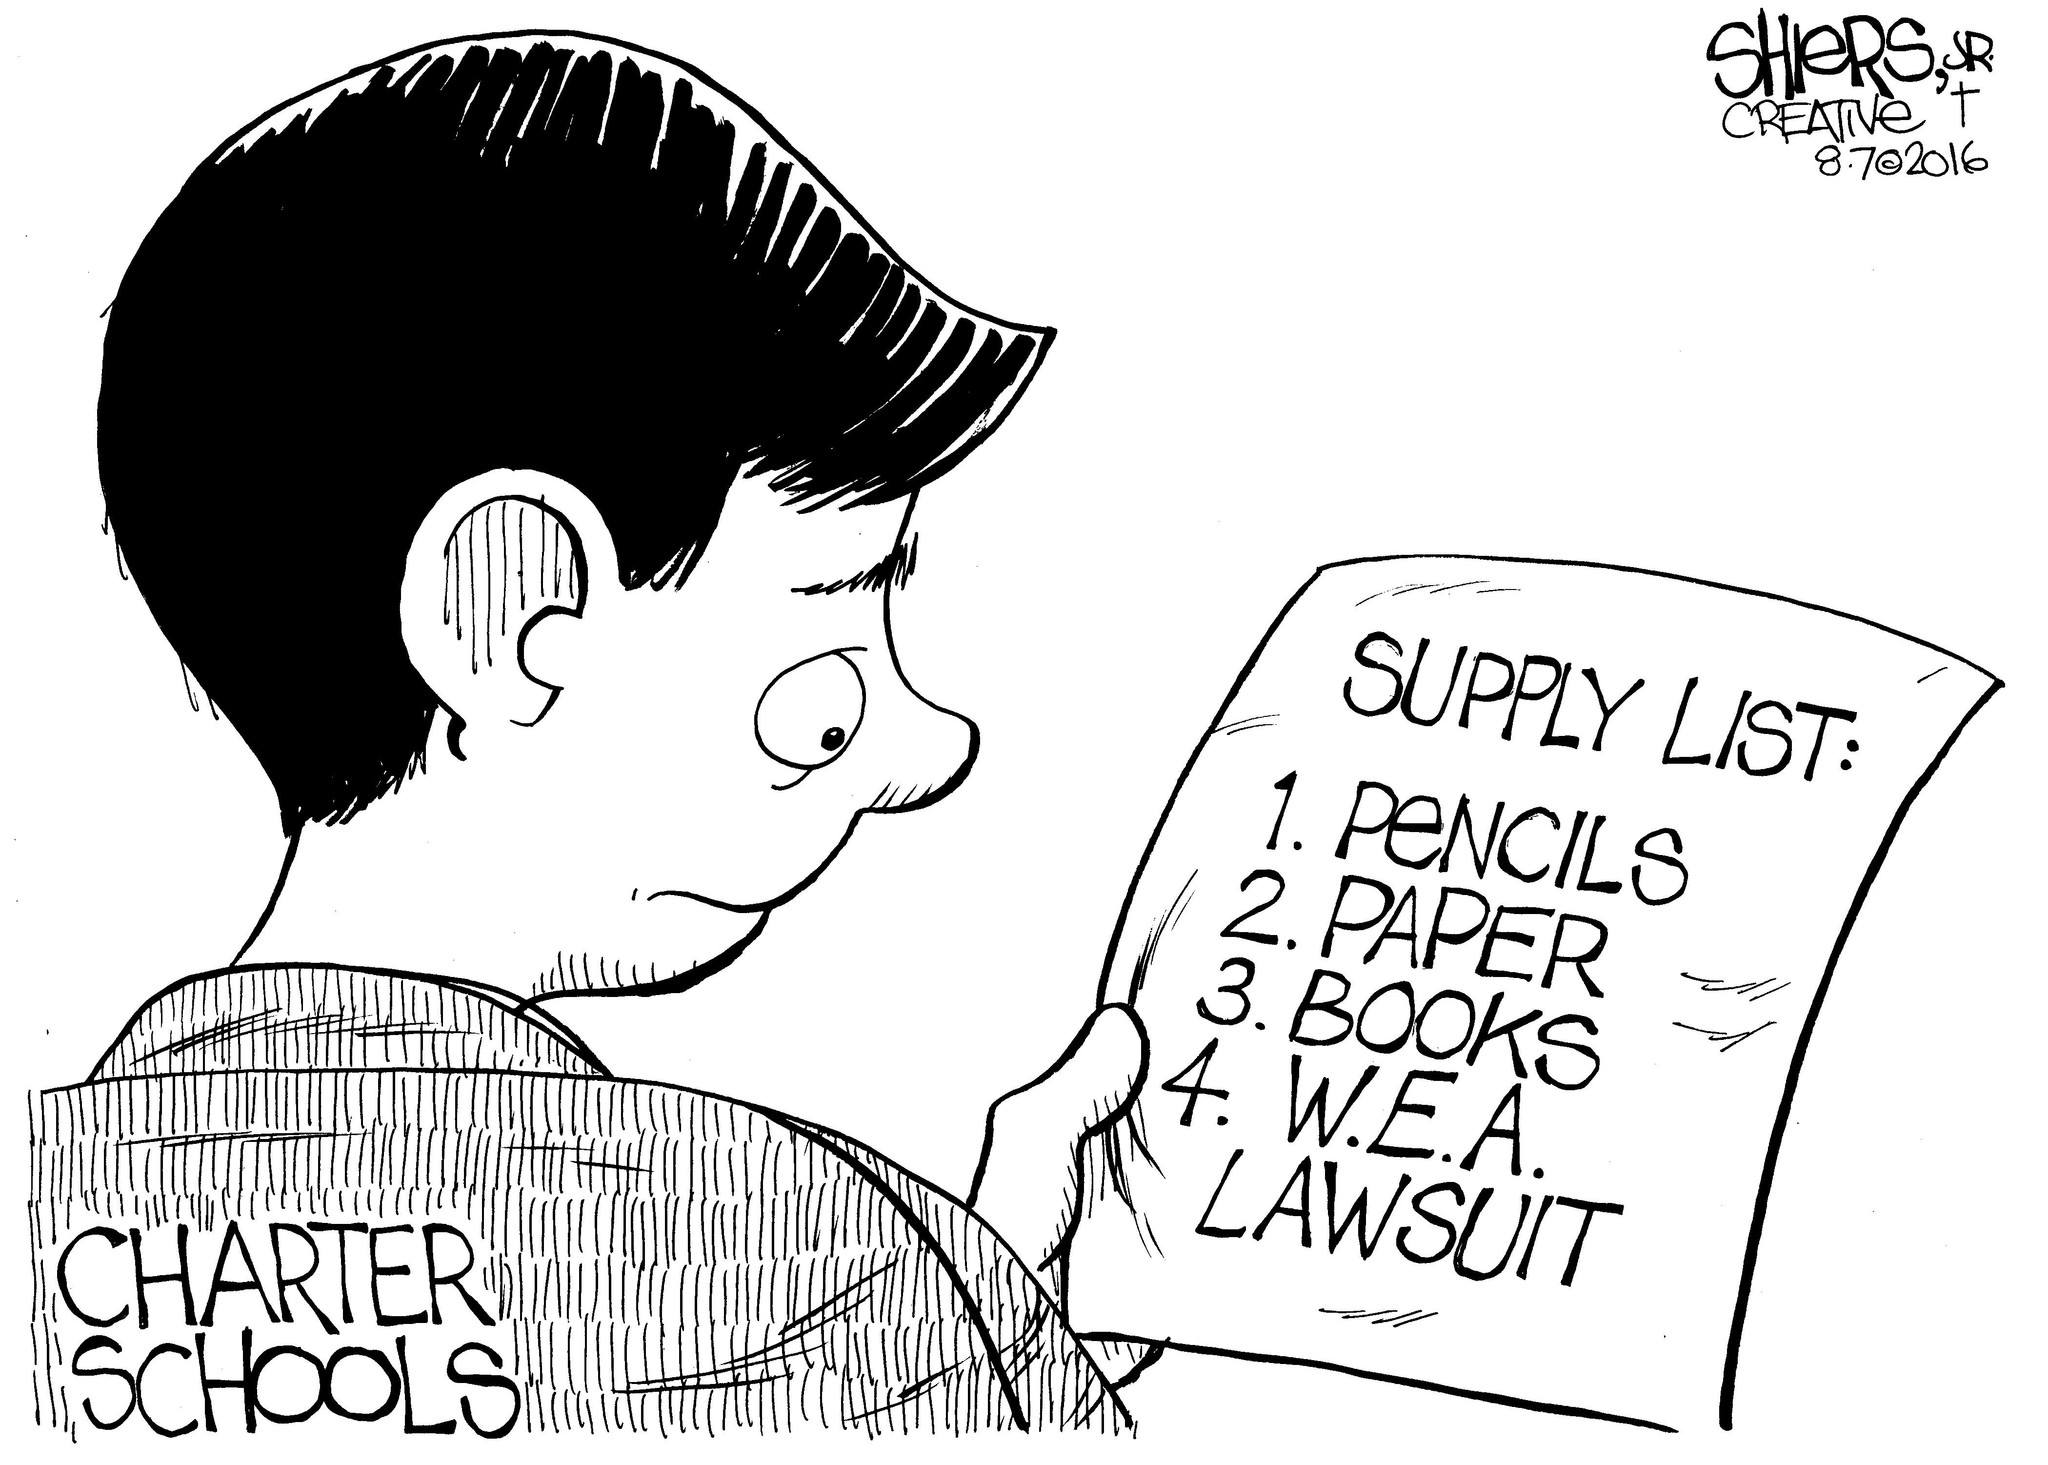 Charter Schools back to school supply list | Cartoon for Aug. 9 - Frank Shiers